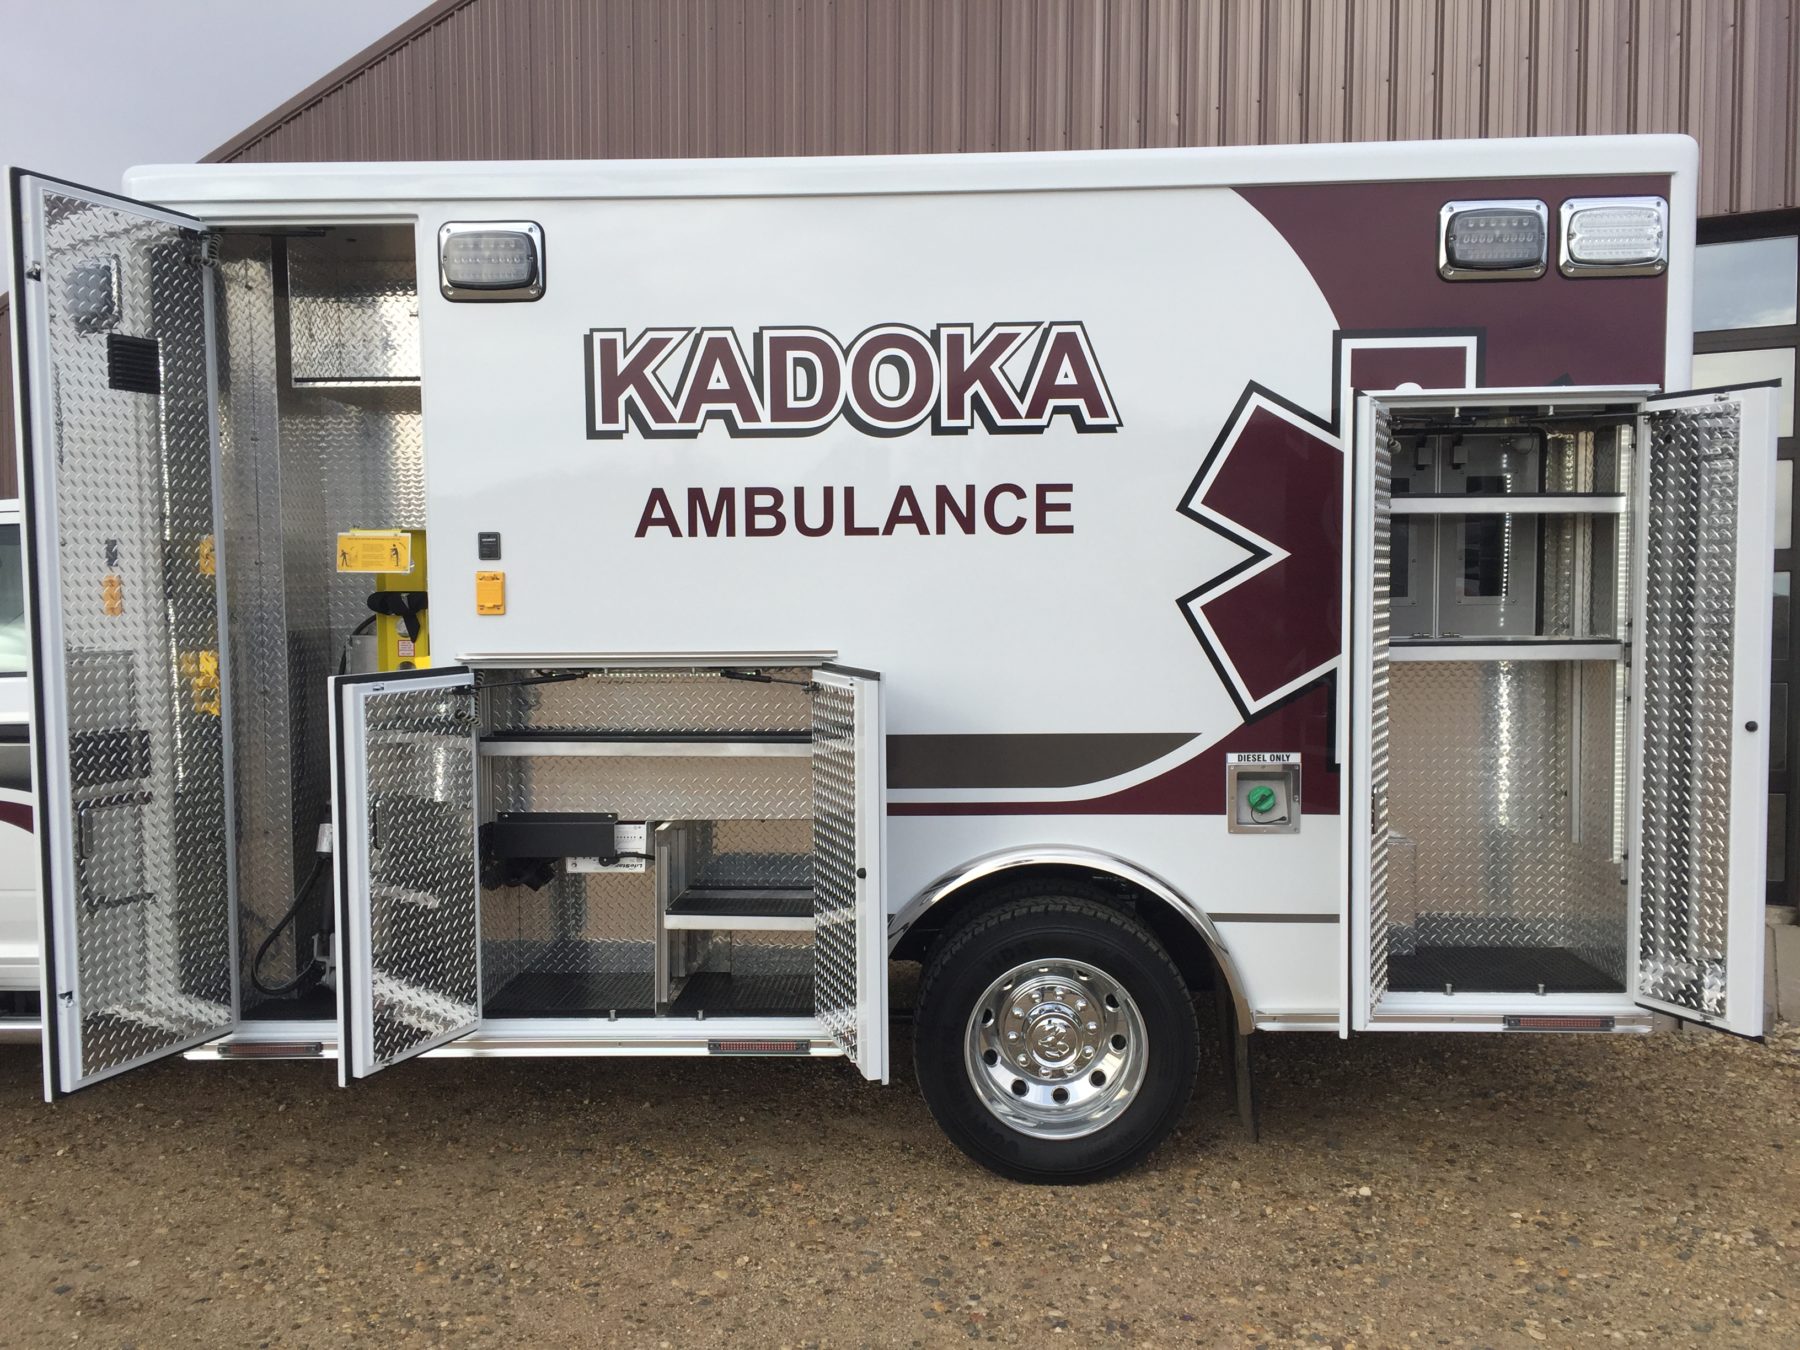 2018 Ram 4500 4x4 Heavy Duty Ambulance For Sale – Picture 6